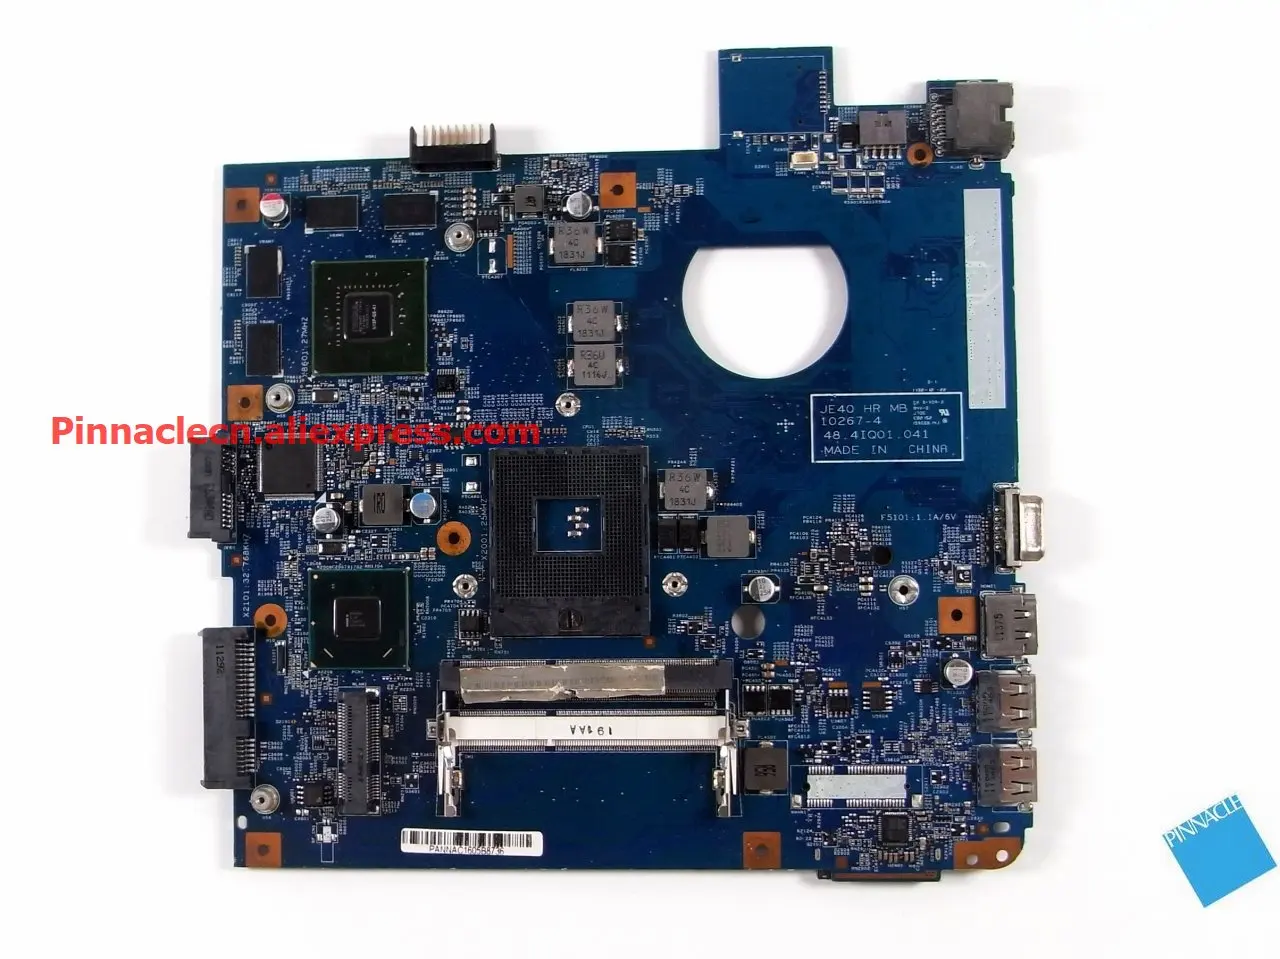 

MBRHY01002 Motherboard for Acer Aspire 4750 4752G 4755G JE40 48.4IQ01.041